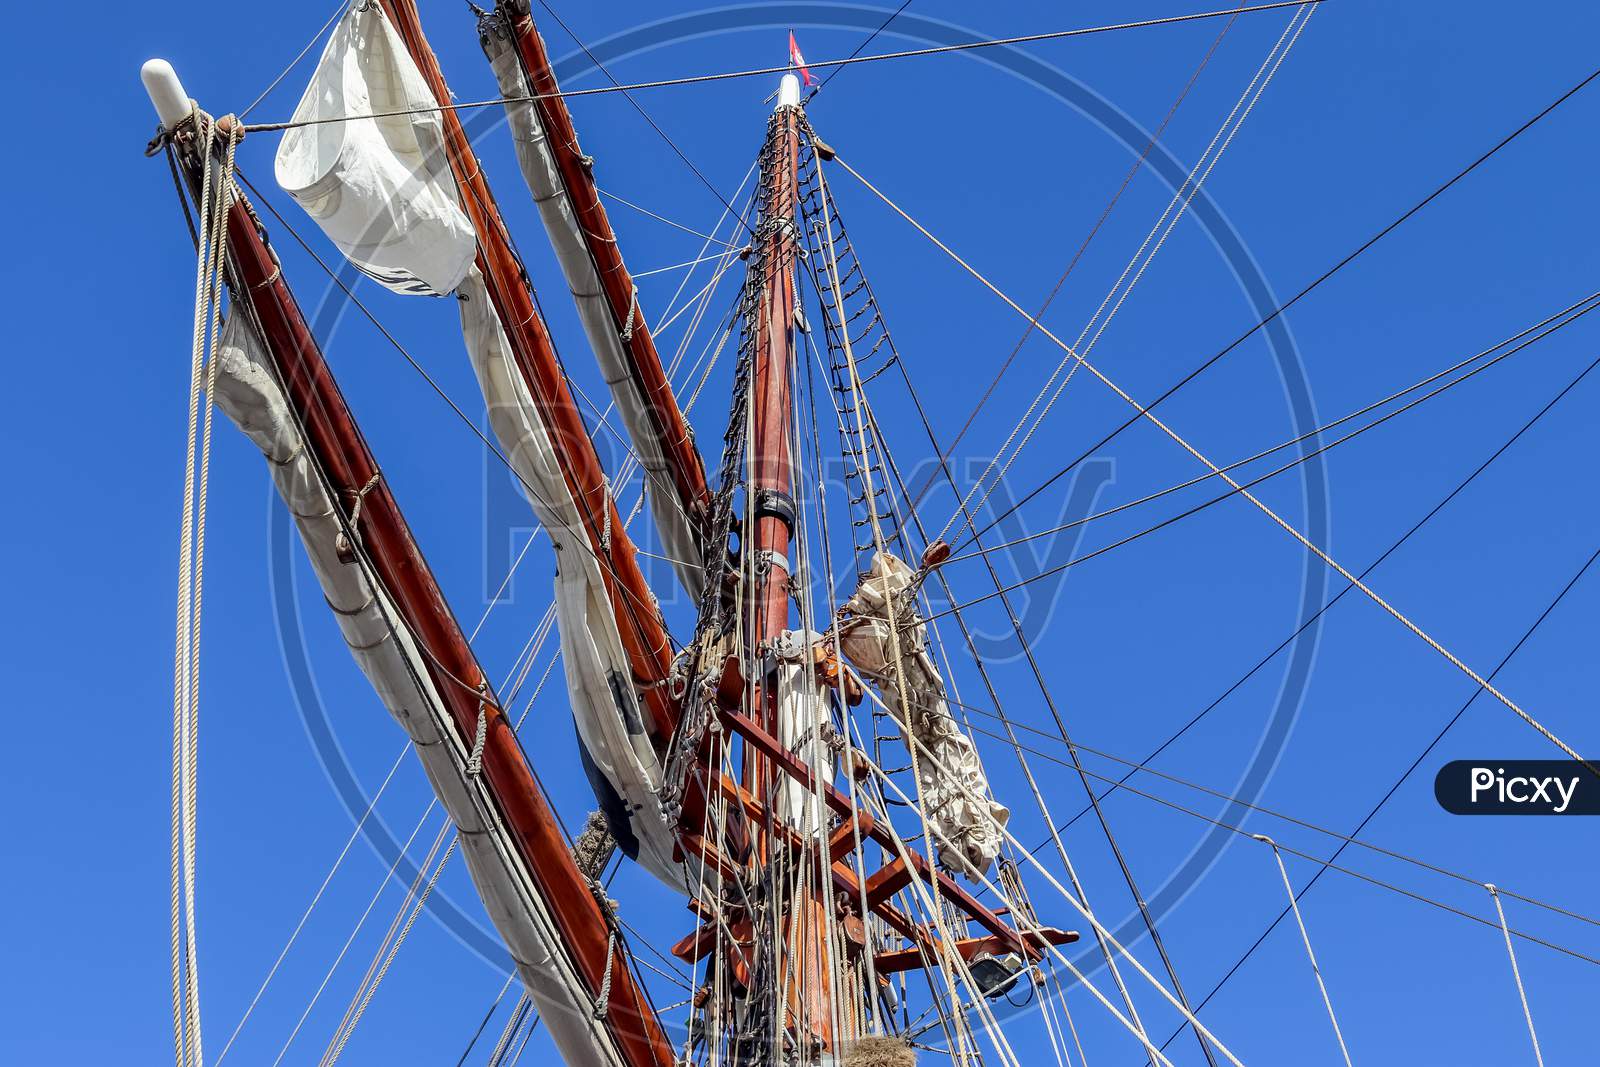 Sailing Ship Mast Against The Blue Sky On Some Sailing Boats With Rigging Details.